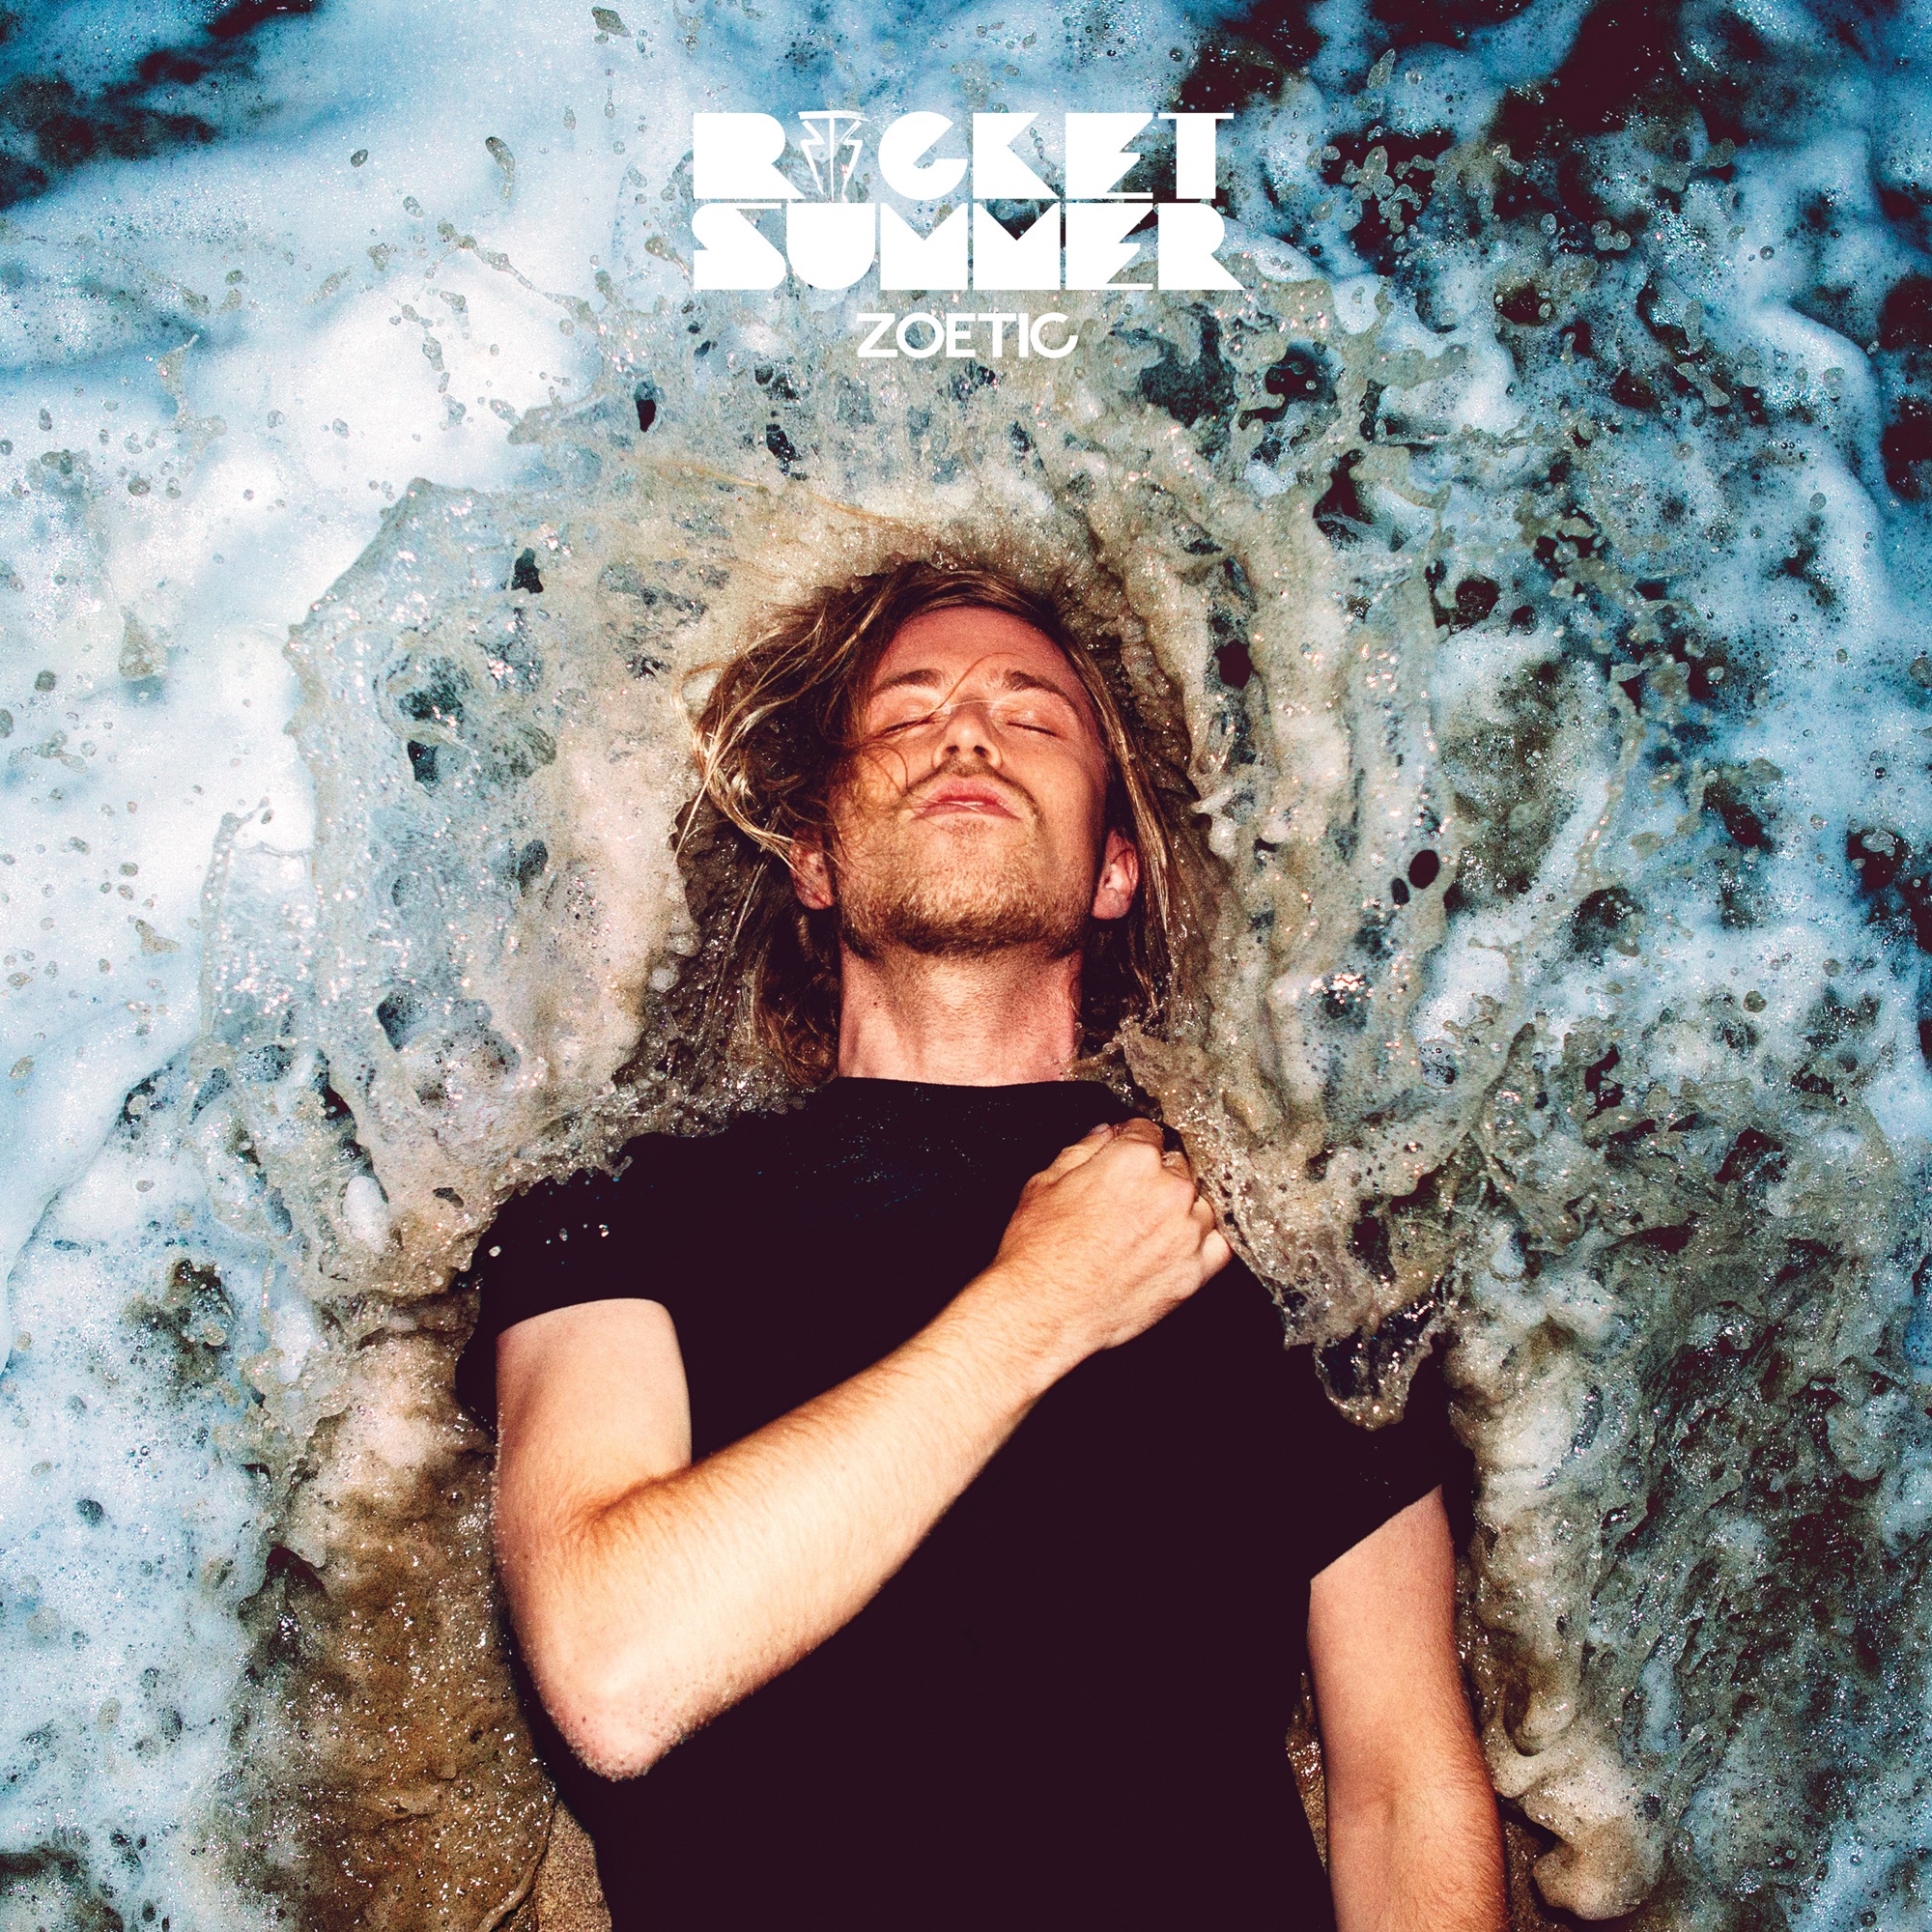 The Rocket Summer — Zoetic cover artwork